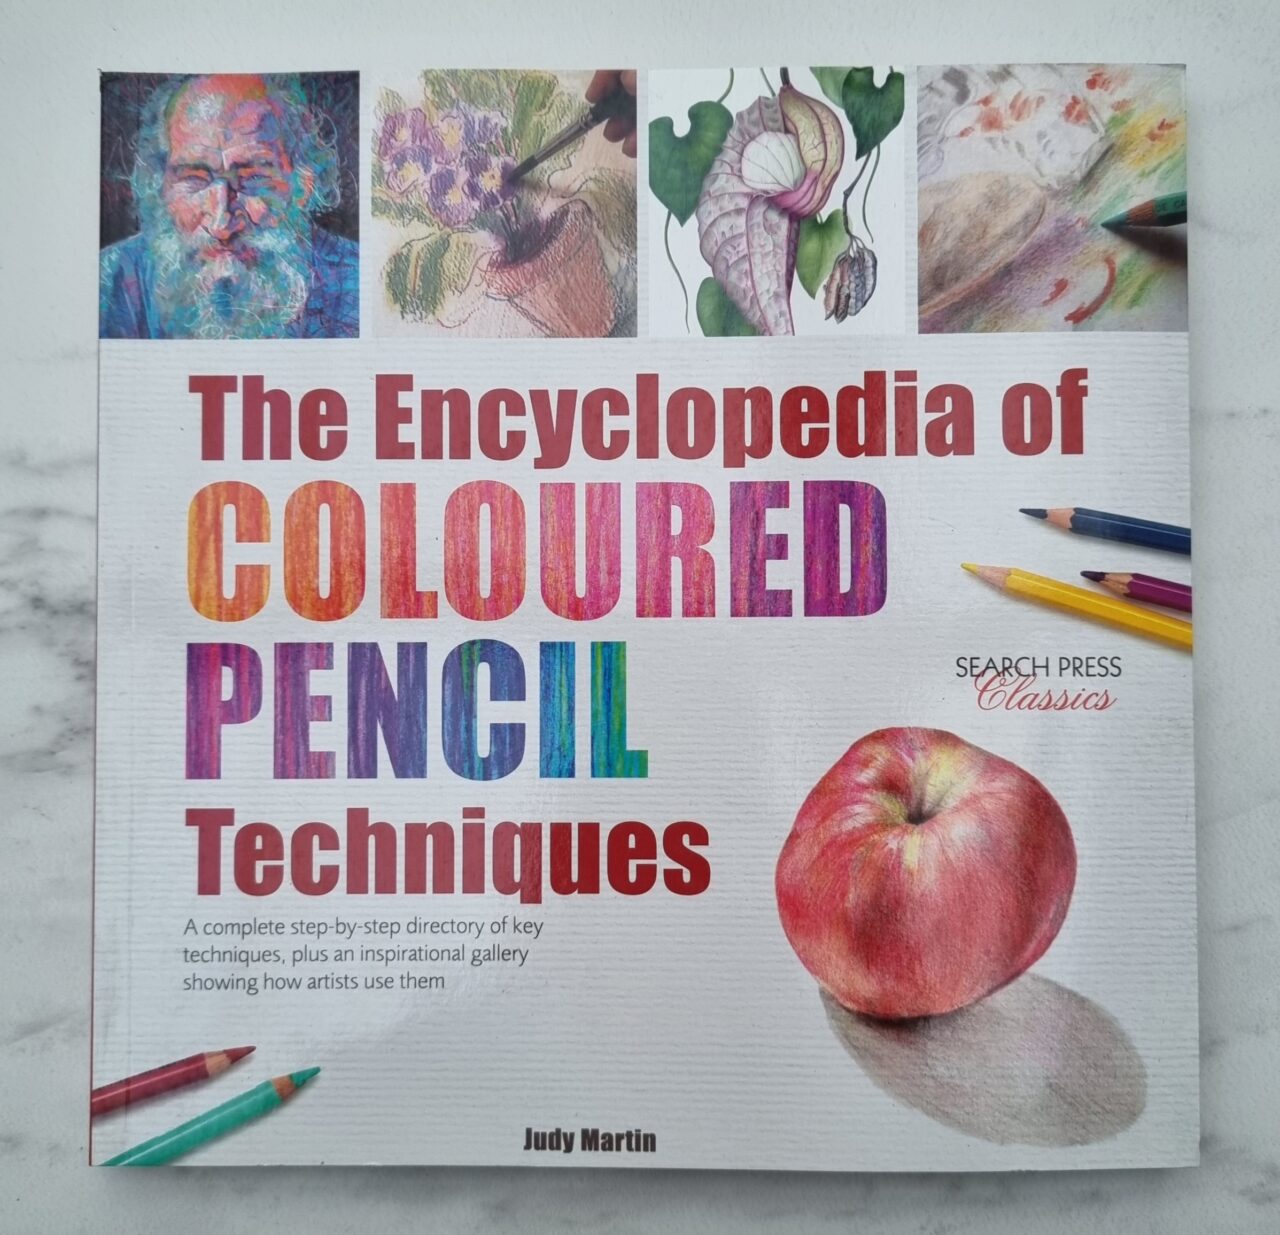 The encyclopedia of colored pencil techniques